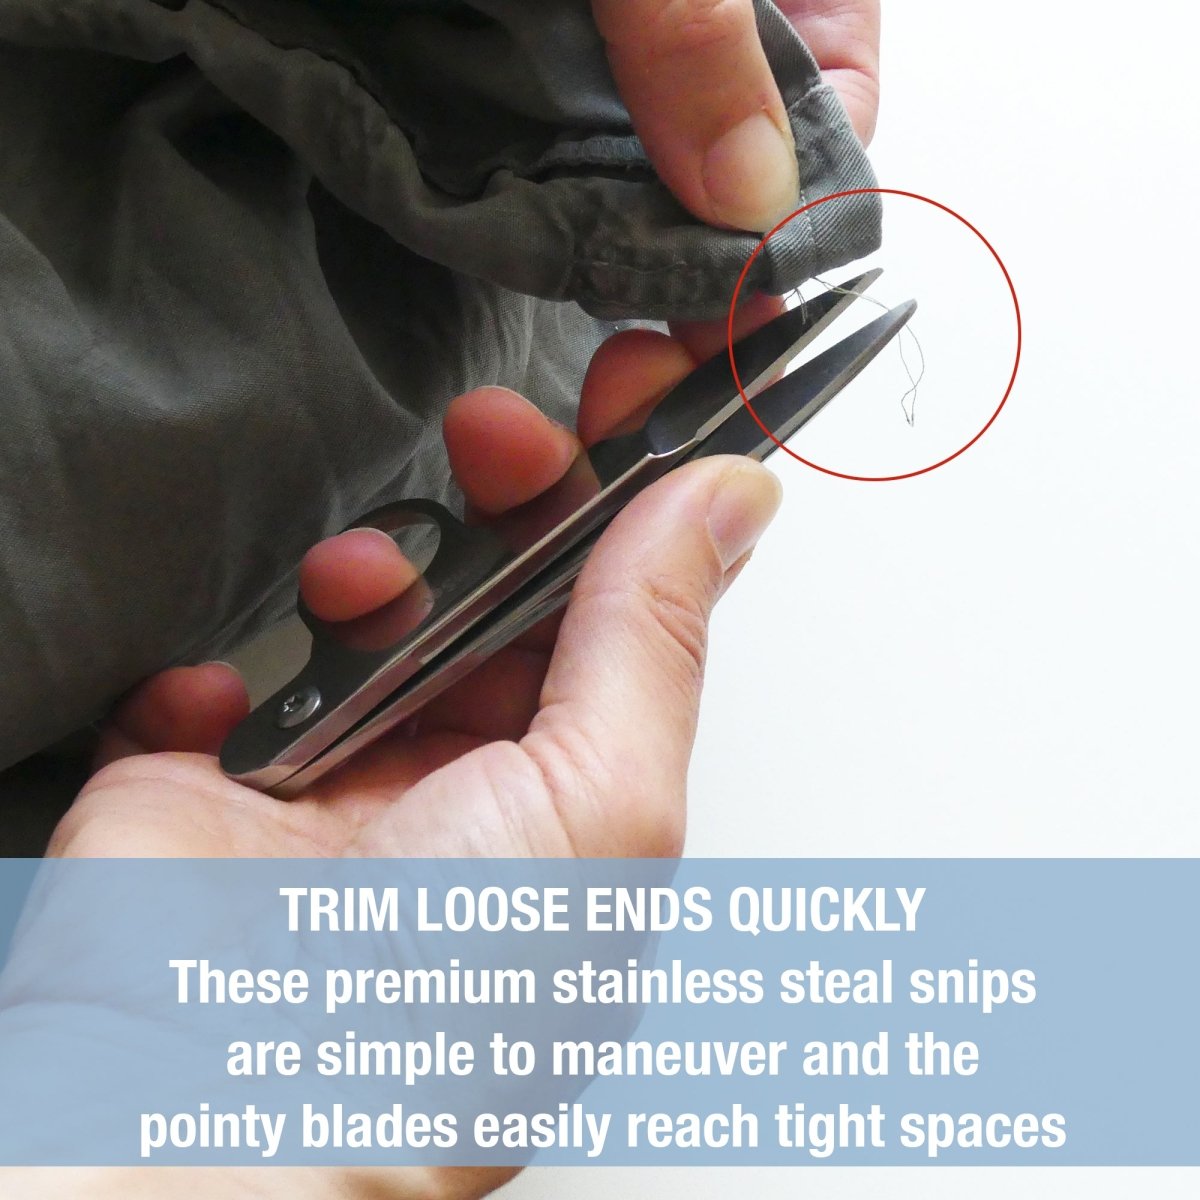 Snipping threads with the Madam Sew thread snips